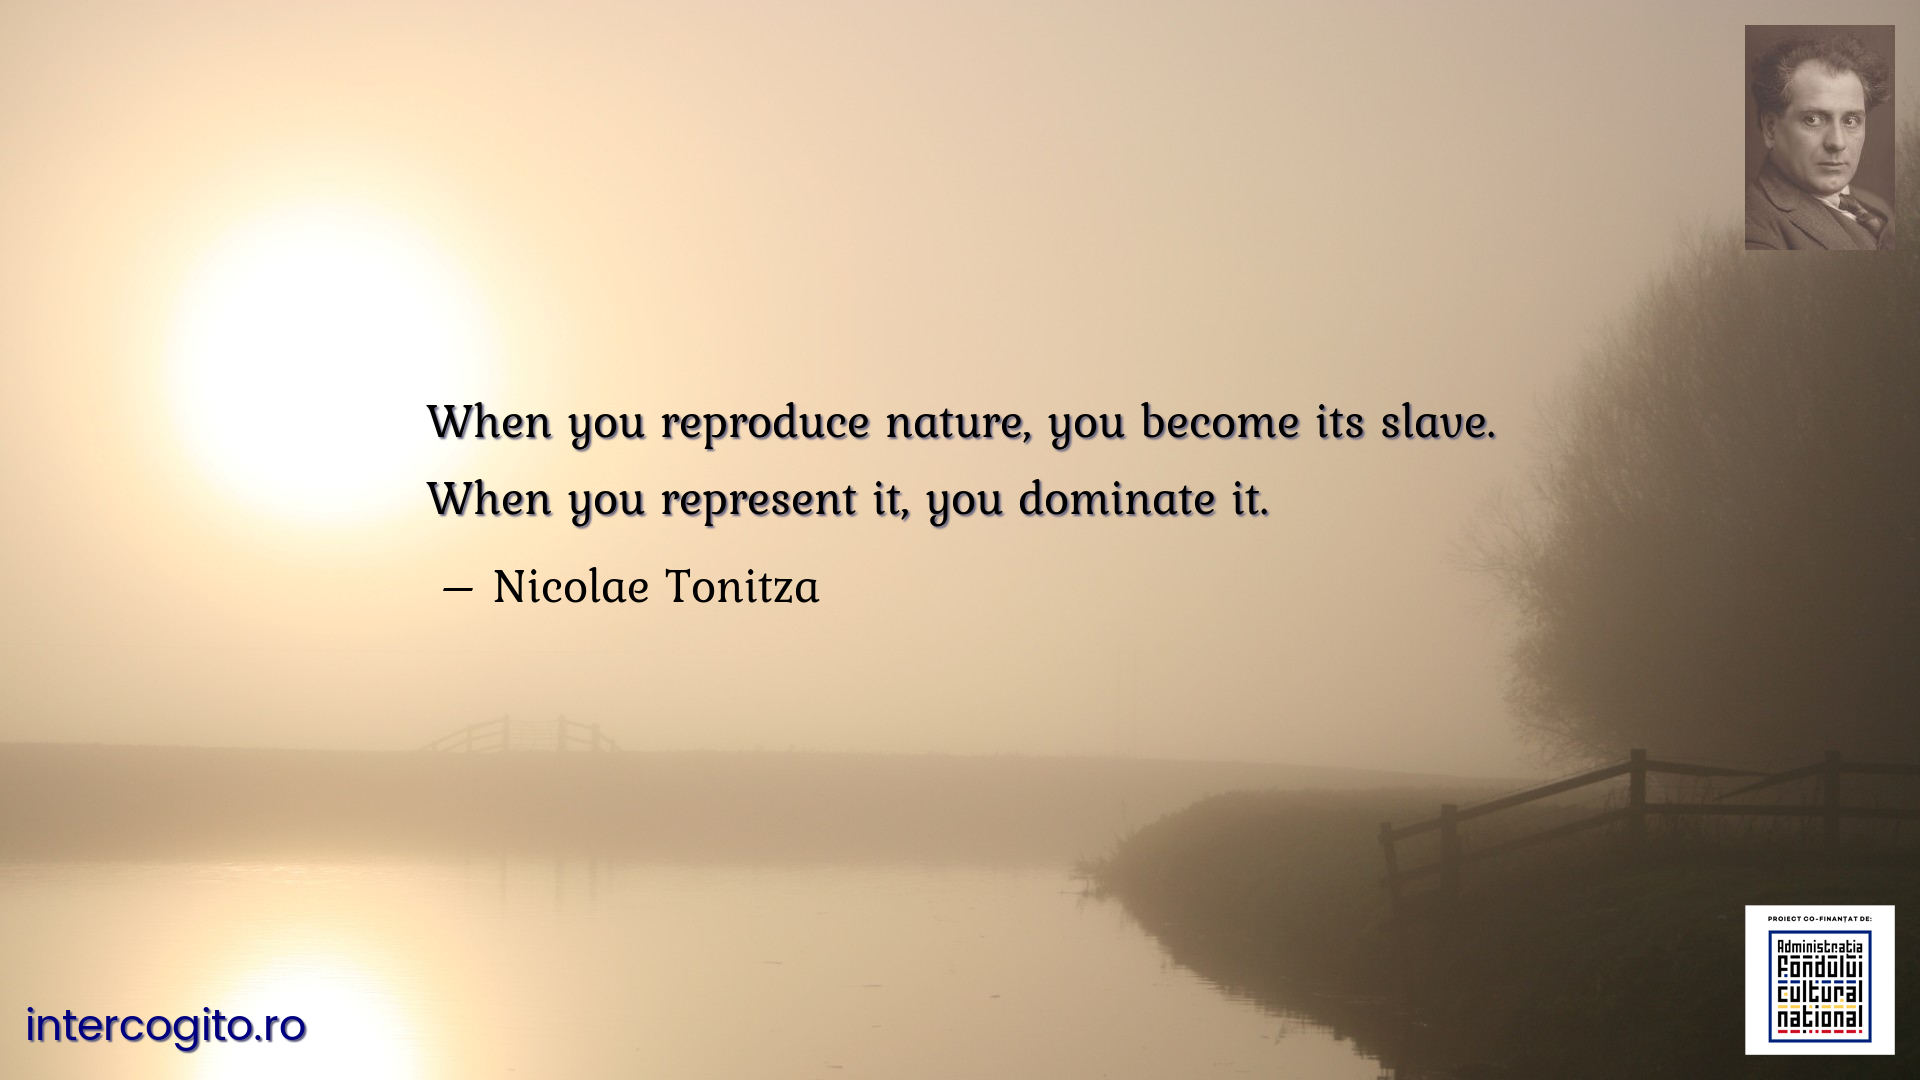 When you reproduce nature, you become its slave. When you represent it, you dominate it.